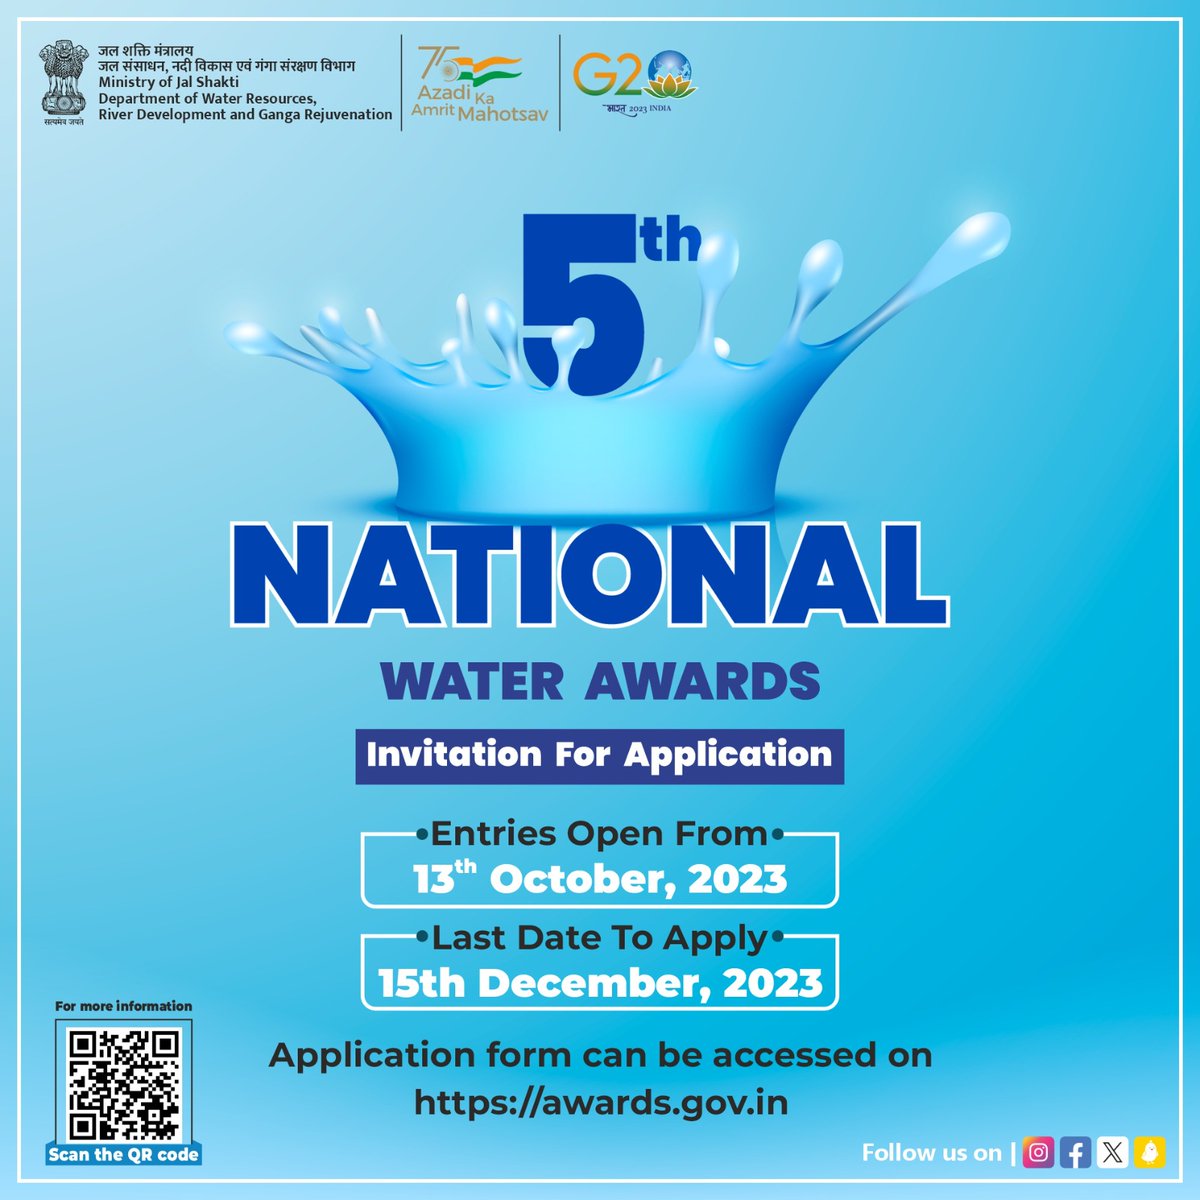 The 5th edition of the #NationalWaterAwards is here. Any entity promoting #waterconservation is eligible to participate. Enroll & share your success stories! It's time to recognize & reward those making waves in #watermanagement. #WaterHeroes #JalShakti #WaterAwards2023 #NWA2023